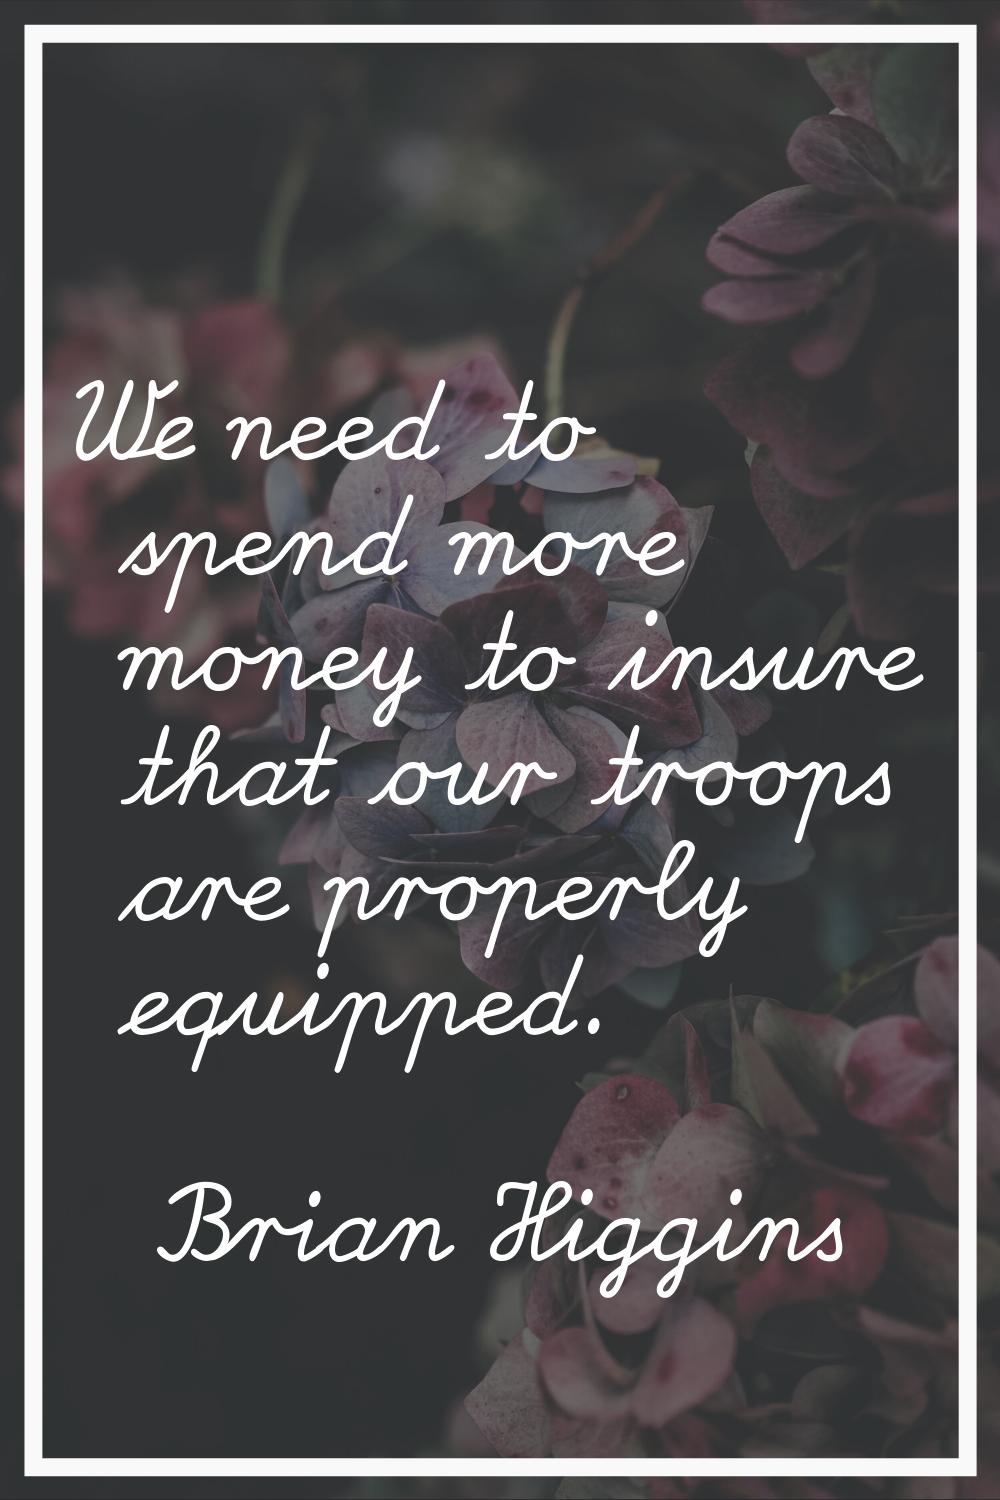 We need to spend more money to insure that our troops are properly equipped.